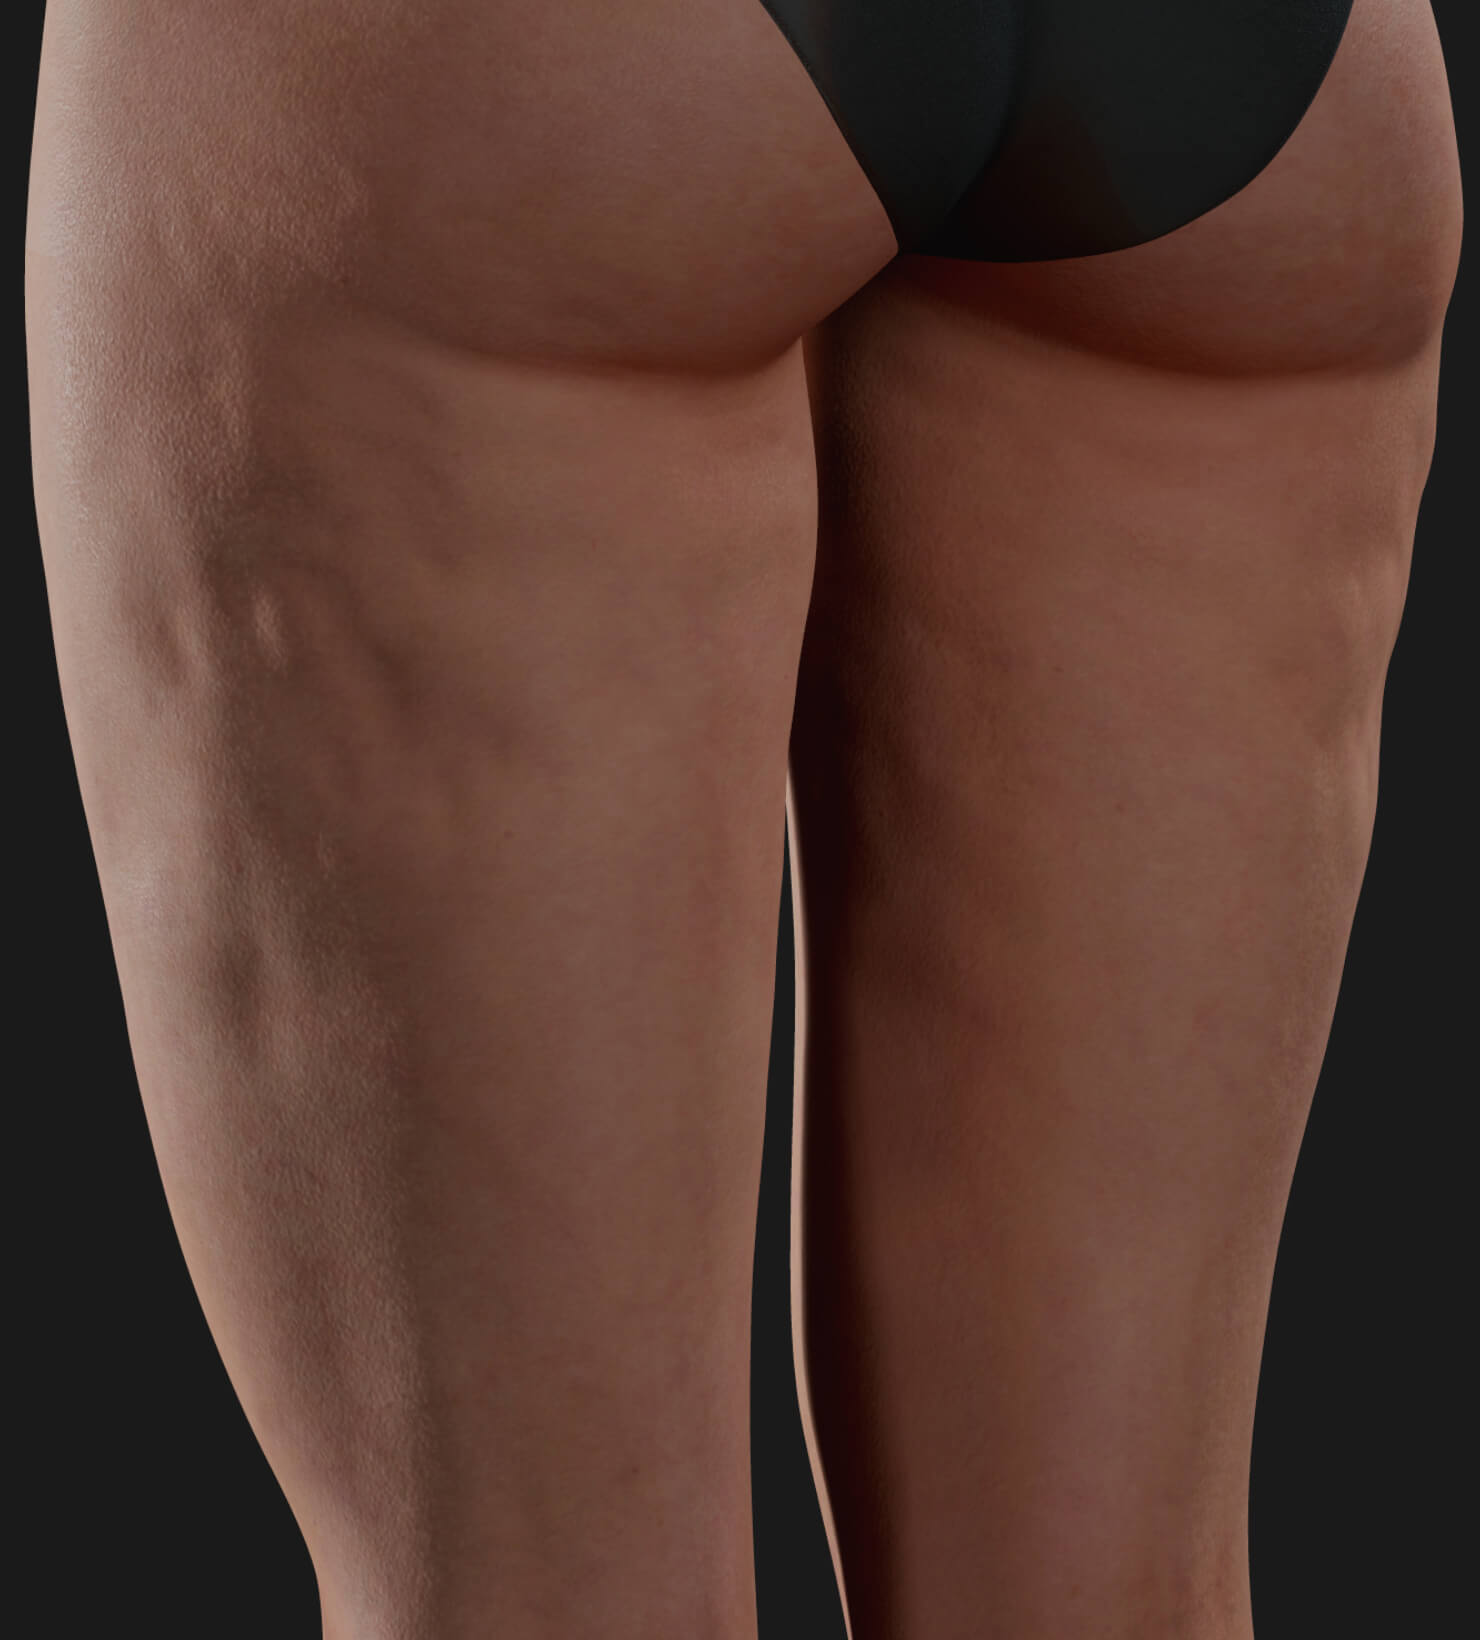 Thighs of a Clinique Chloé female patient showing cellulite, to be treated with Profound RF for cellulite reduction